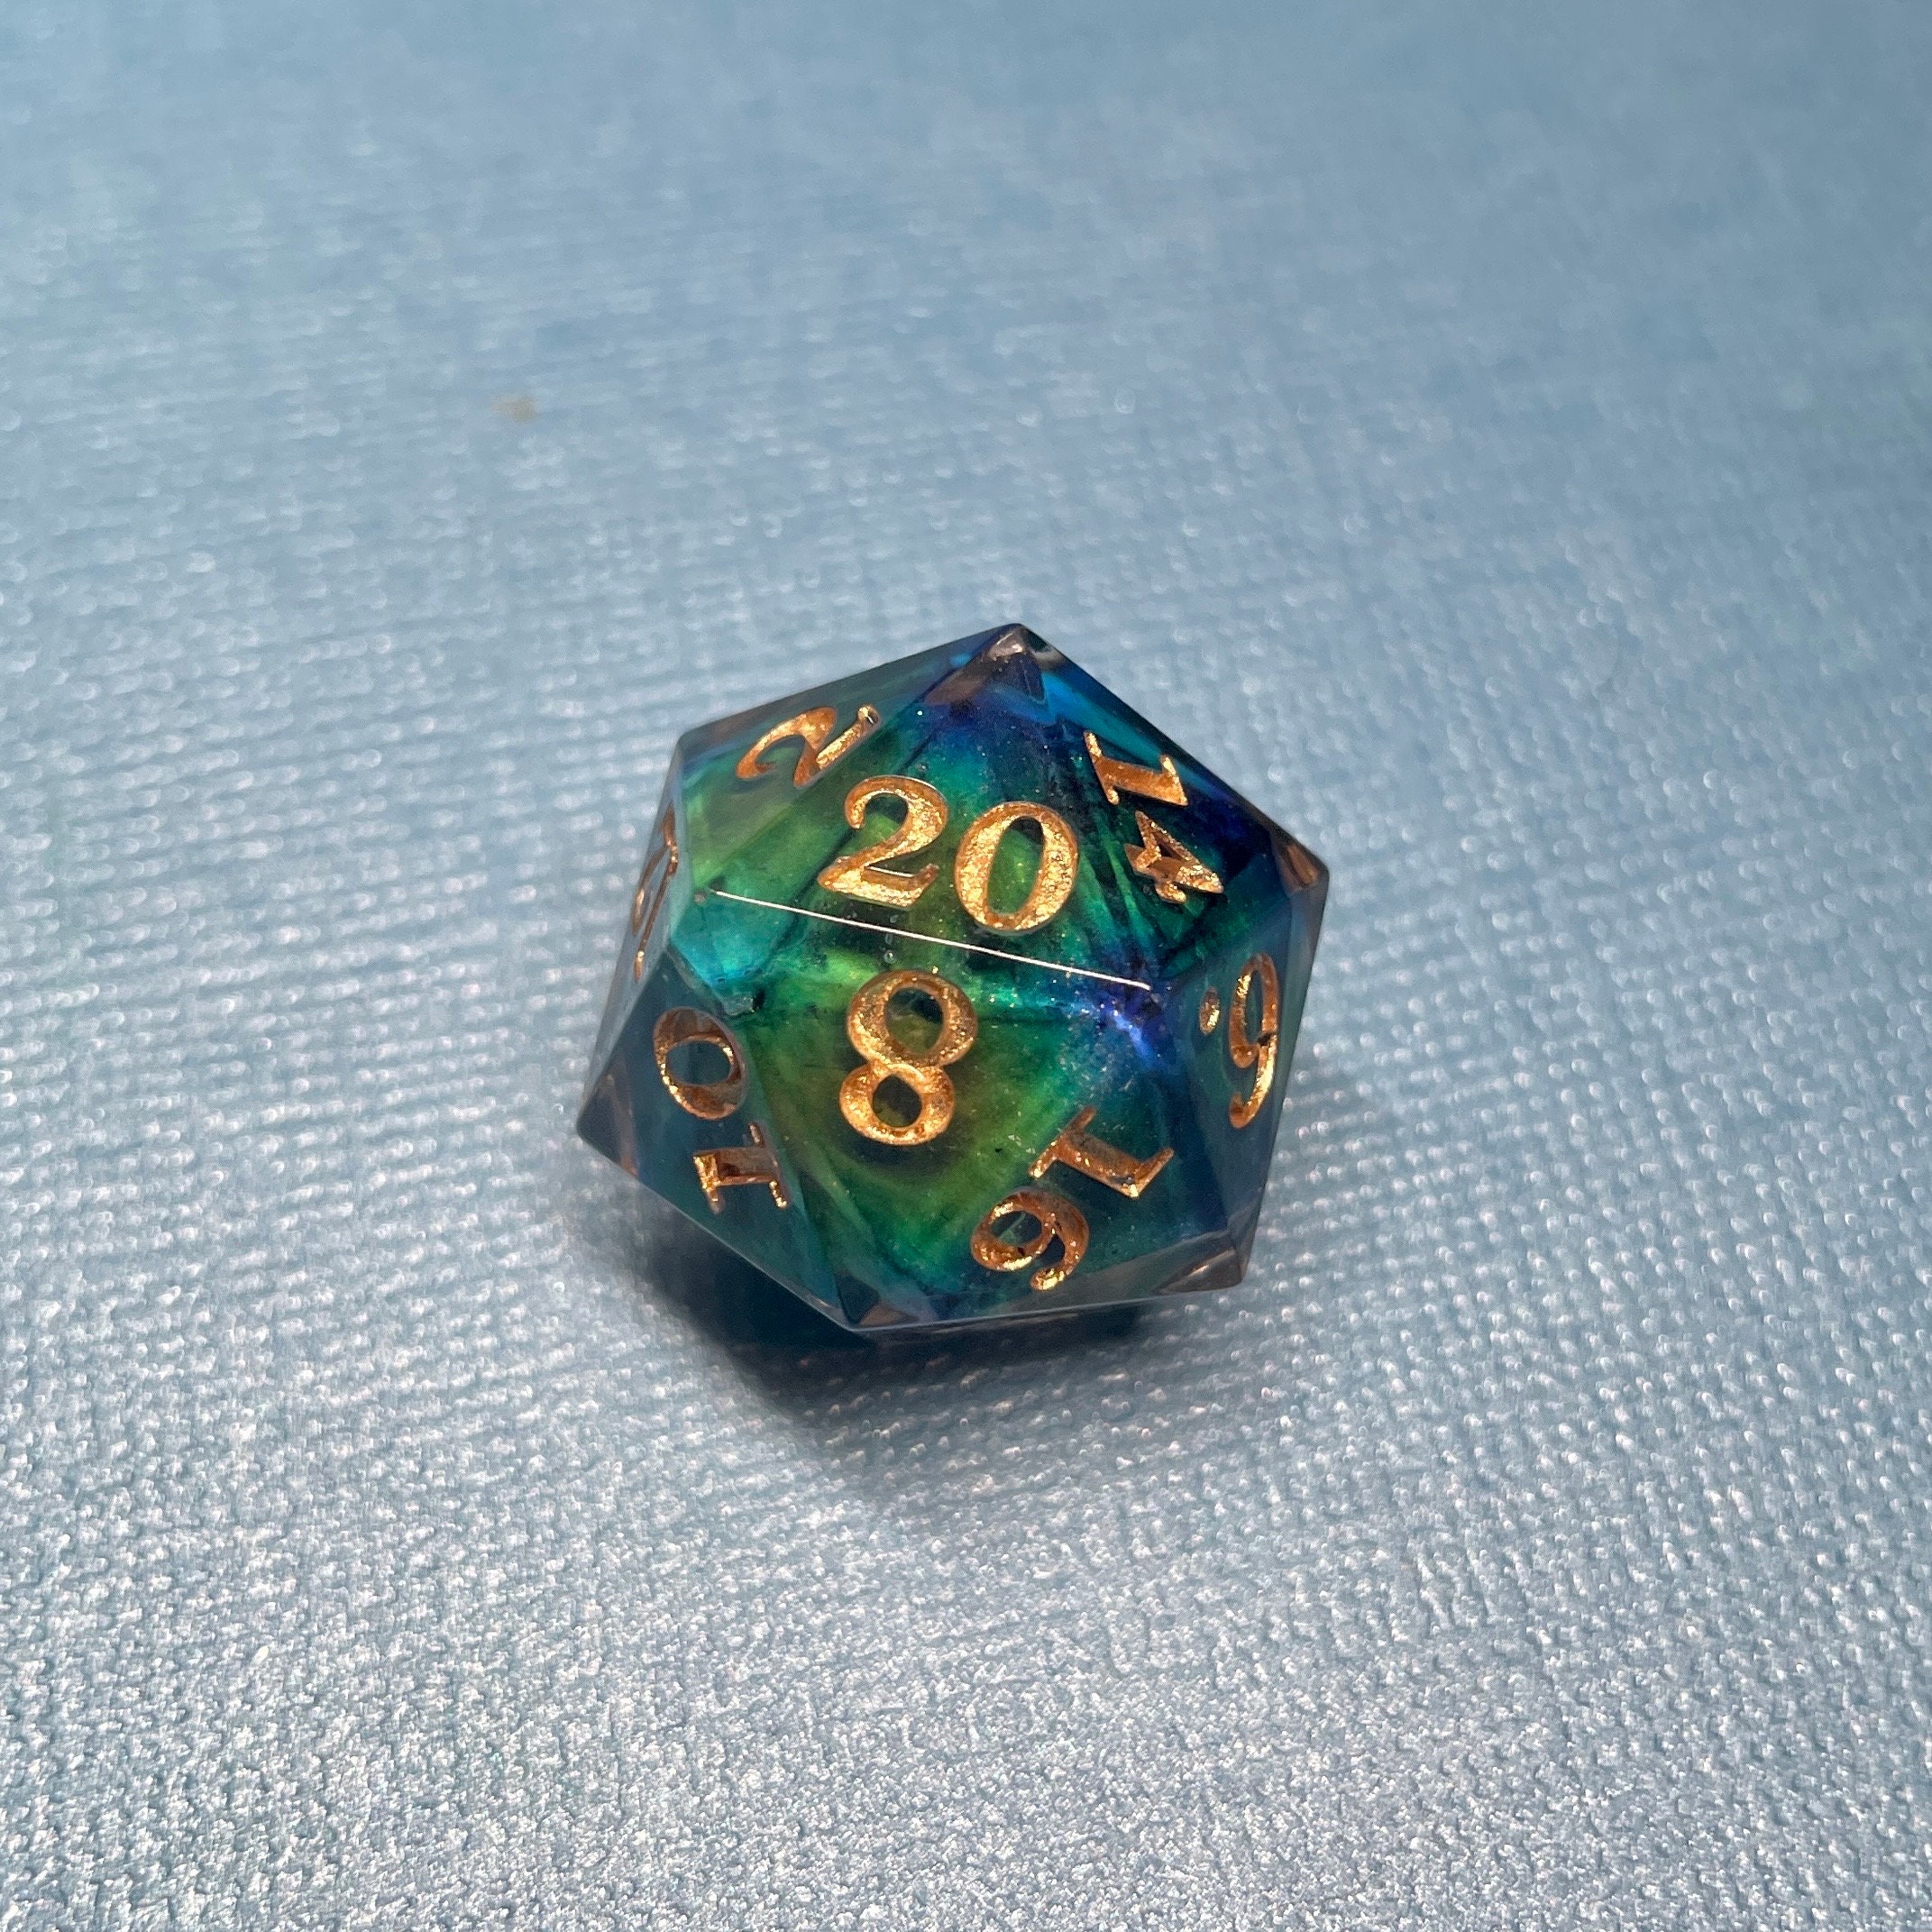 OC] I made a mood ring d20 that changes color with the heat of